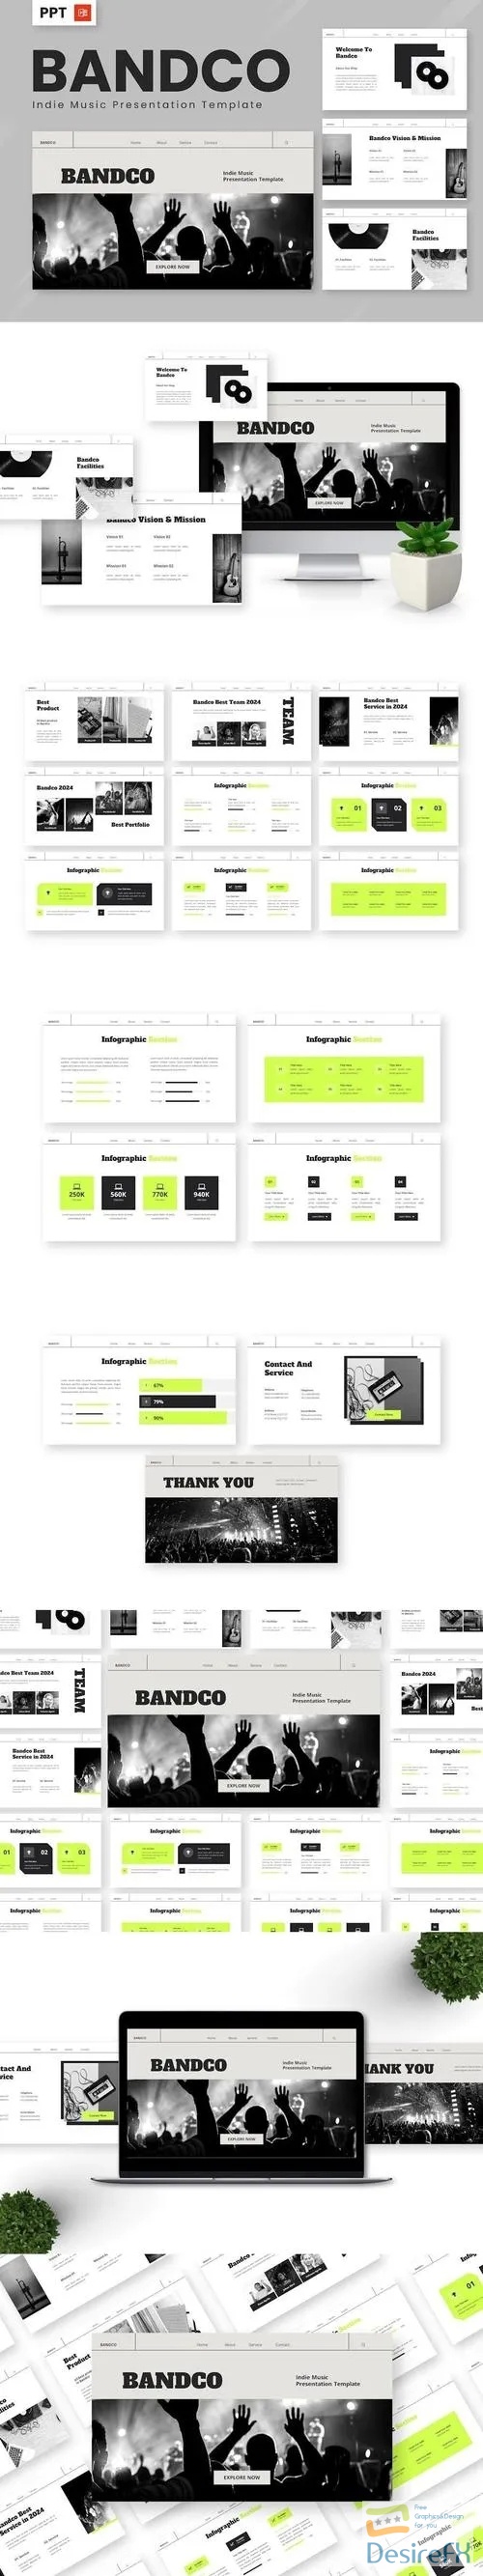 Bandco - Indie Music Powerpoint Templates